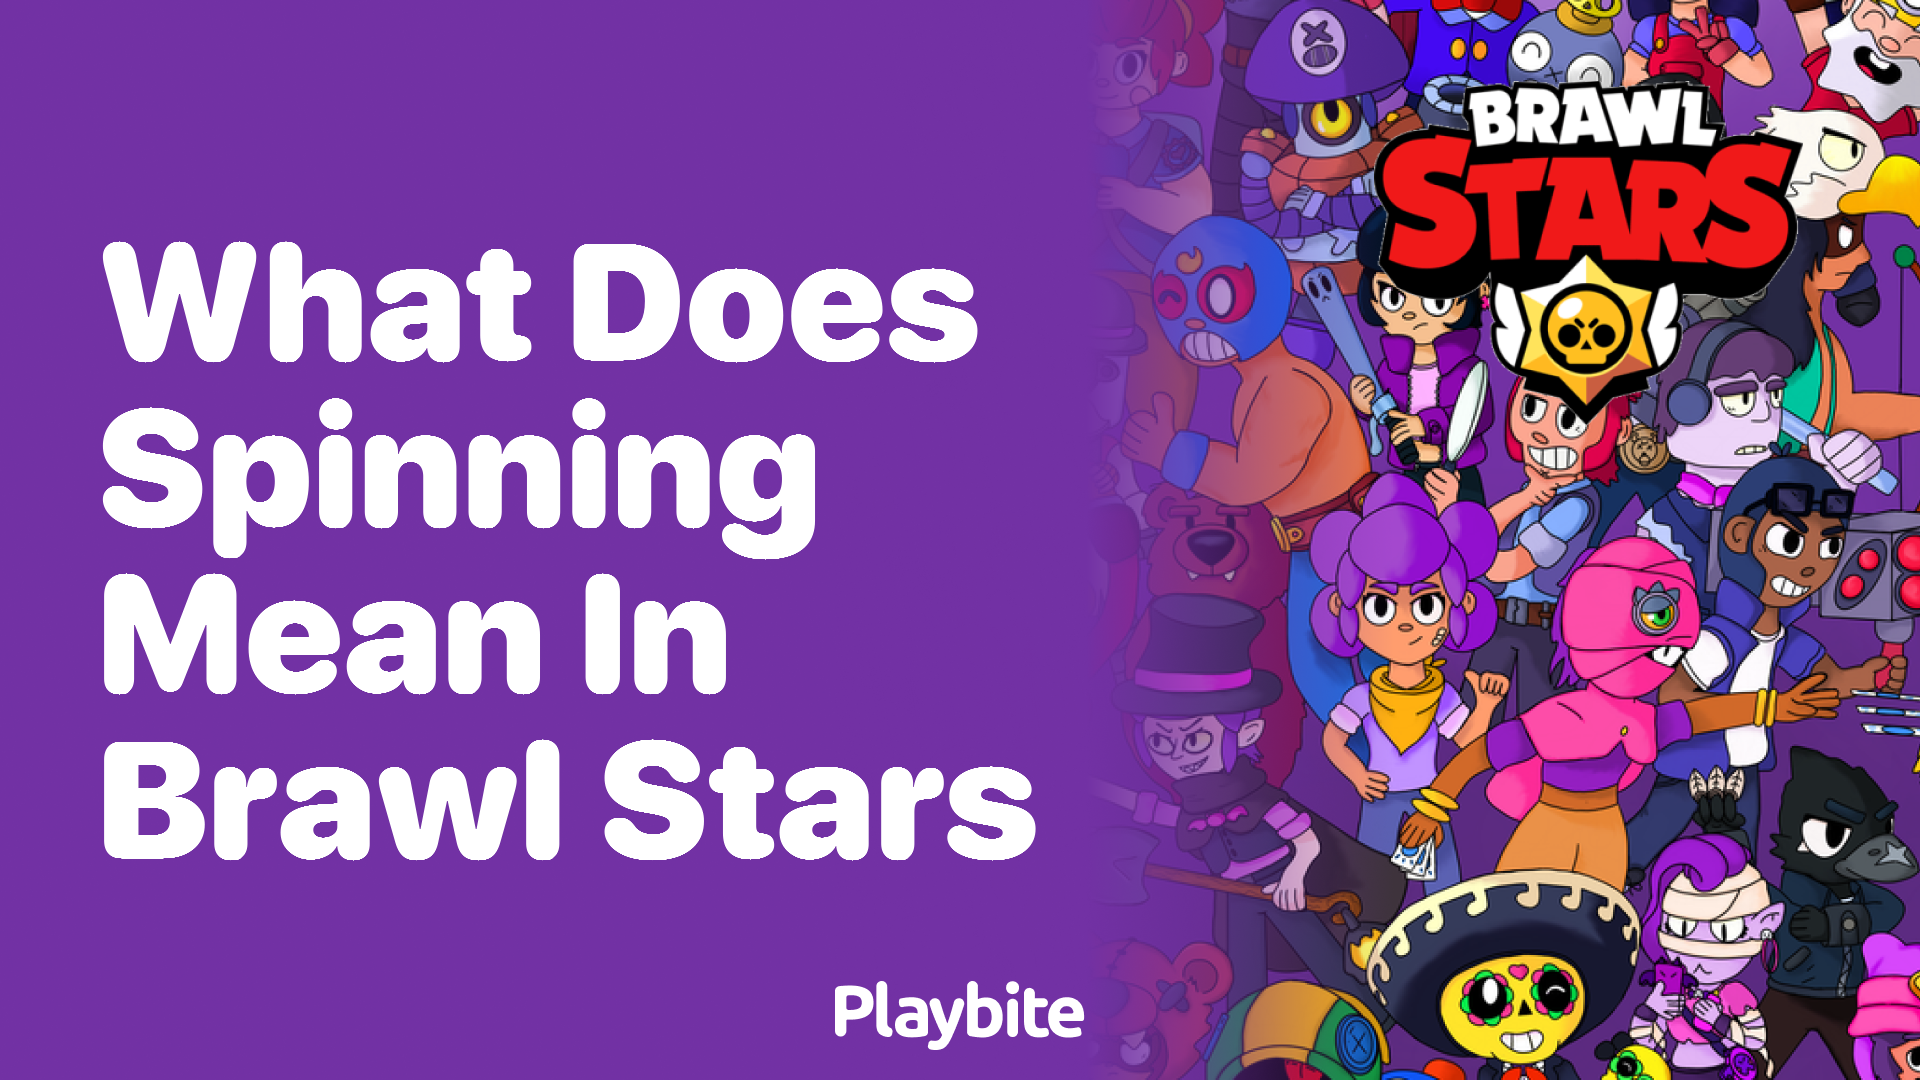 What Does Spinning Mean in Brawl Stars? - Playbite